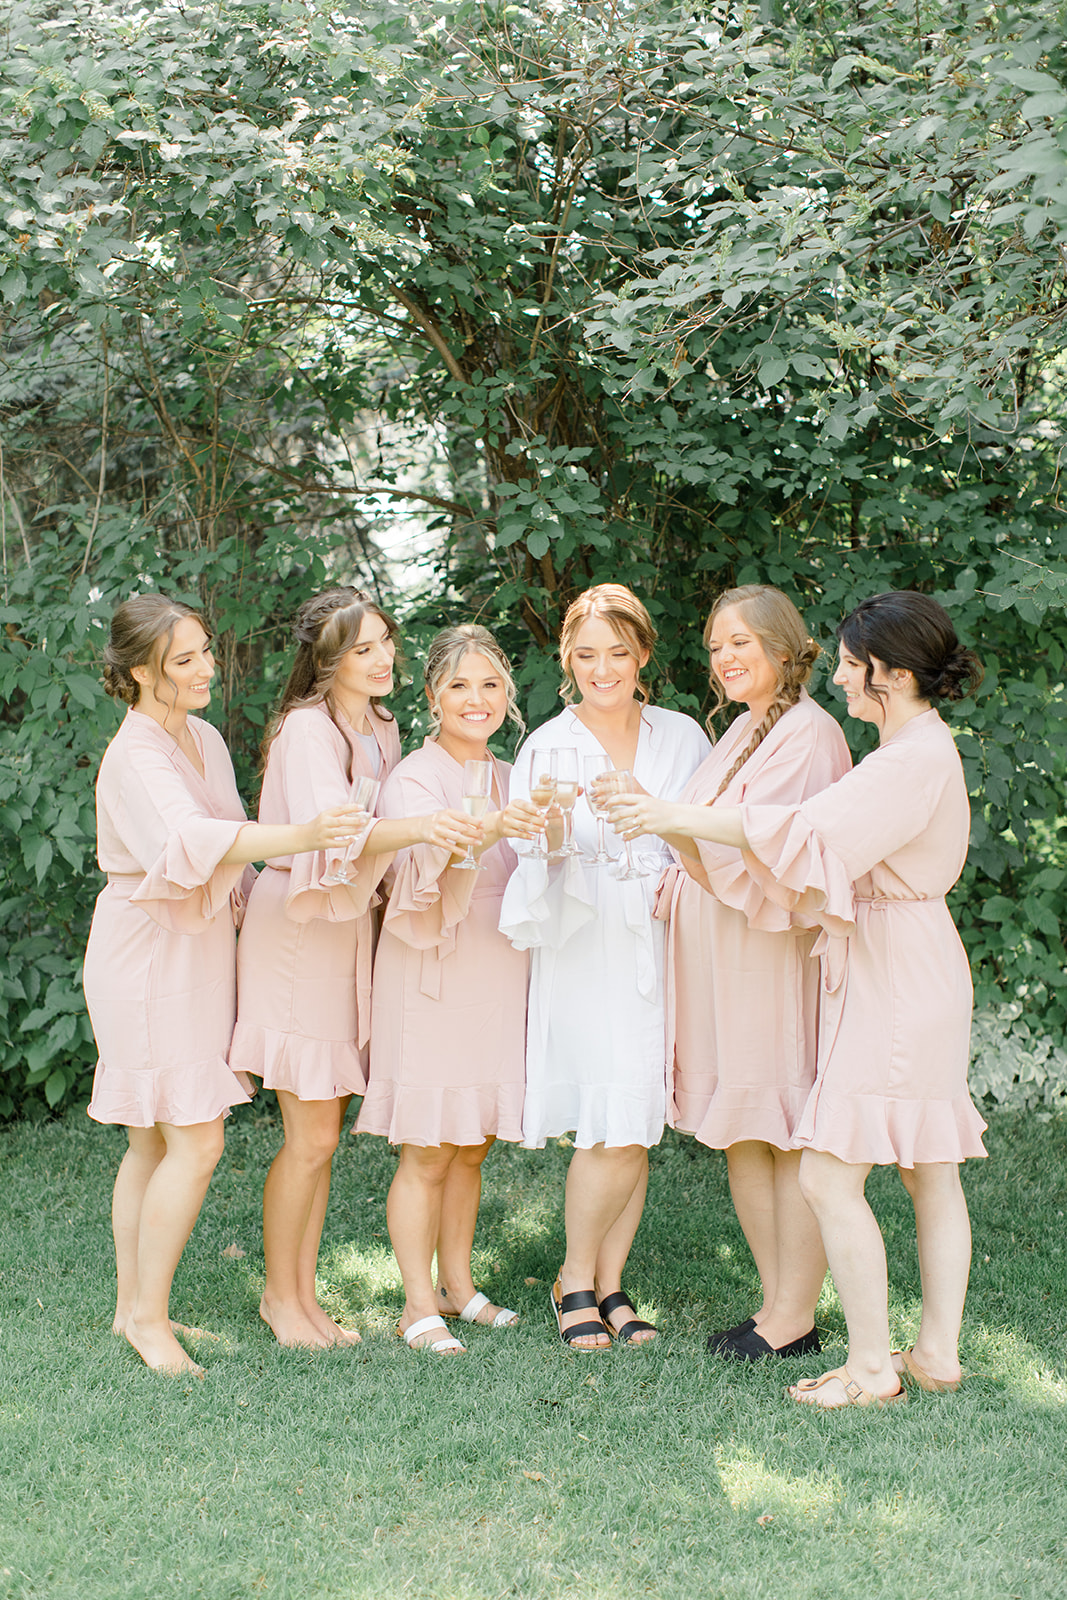 Bridal party champagne toast at outdoor wedding, bridal robes